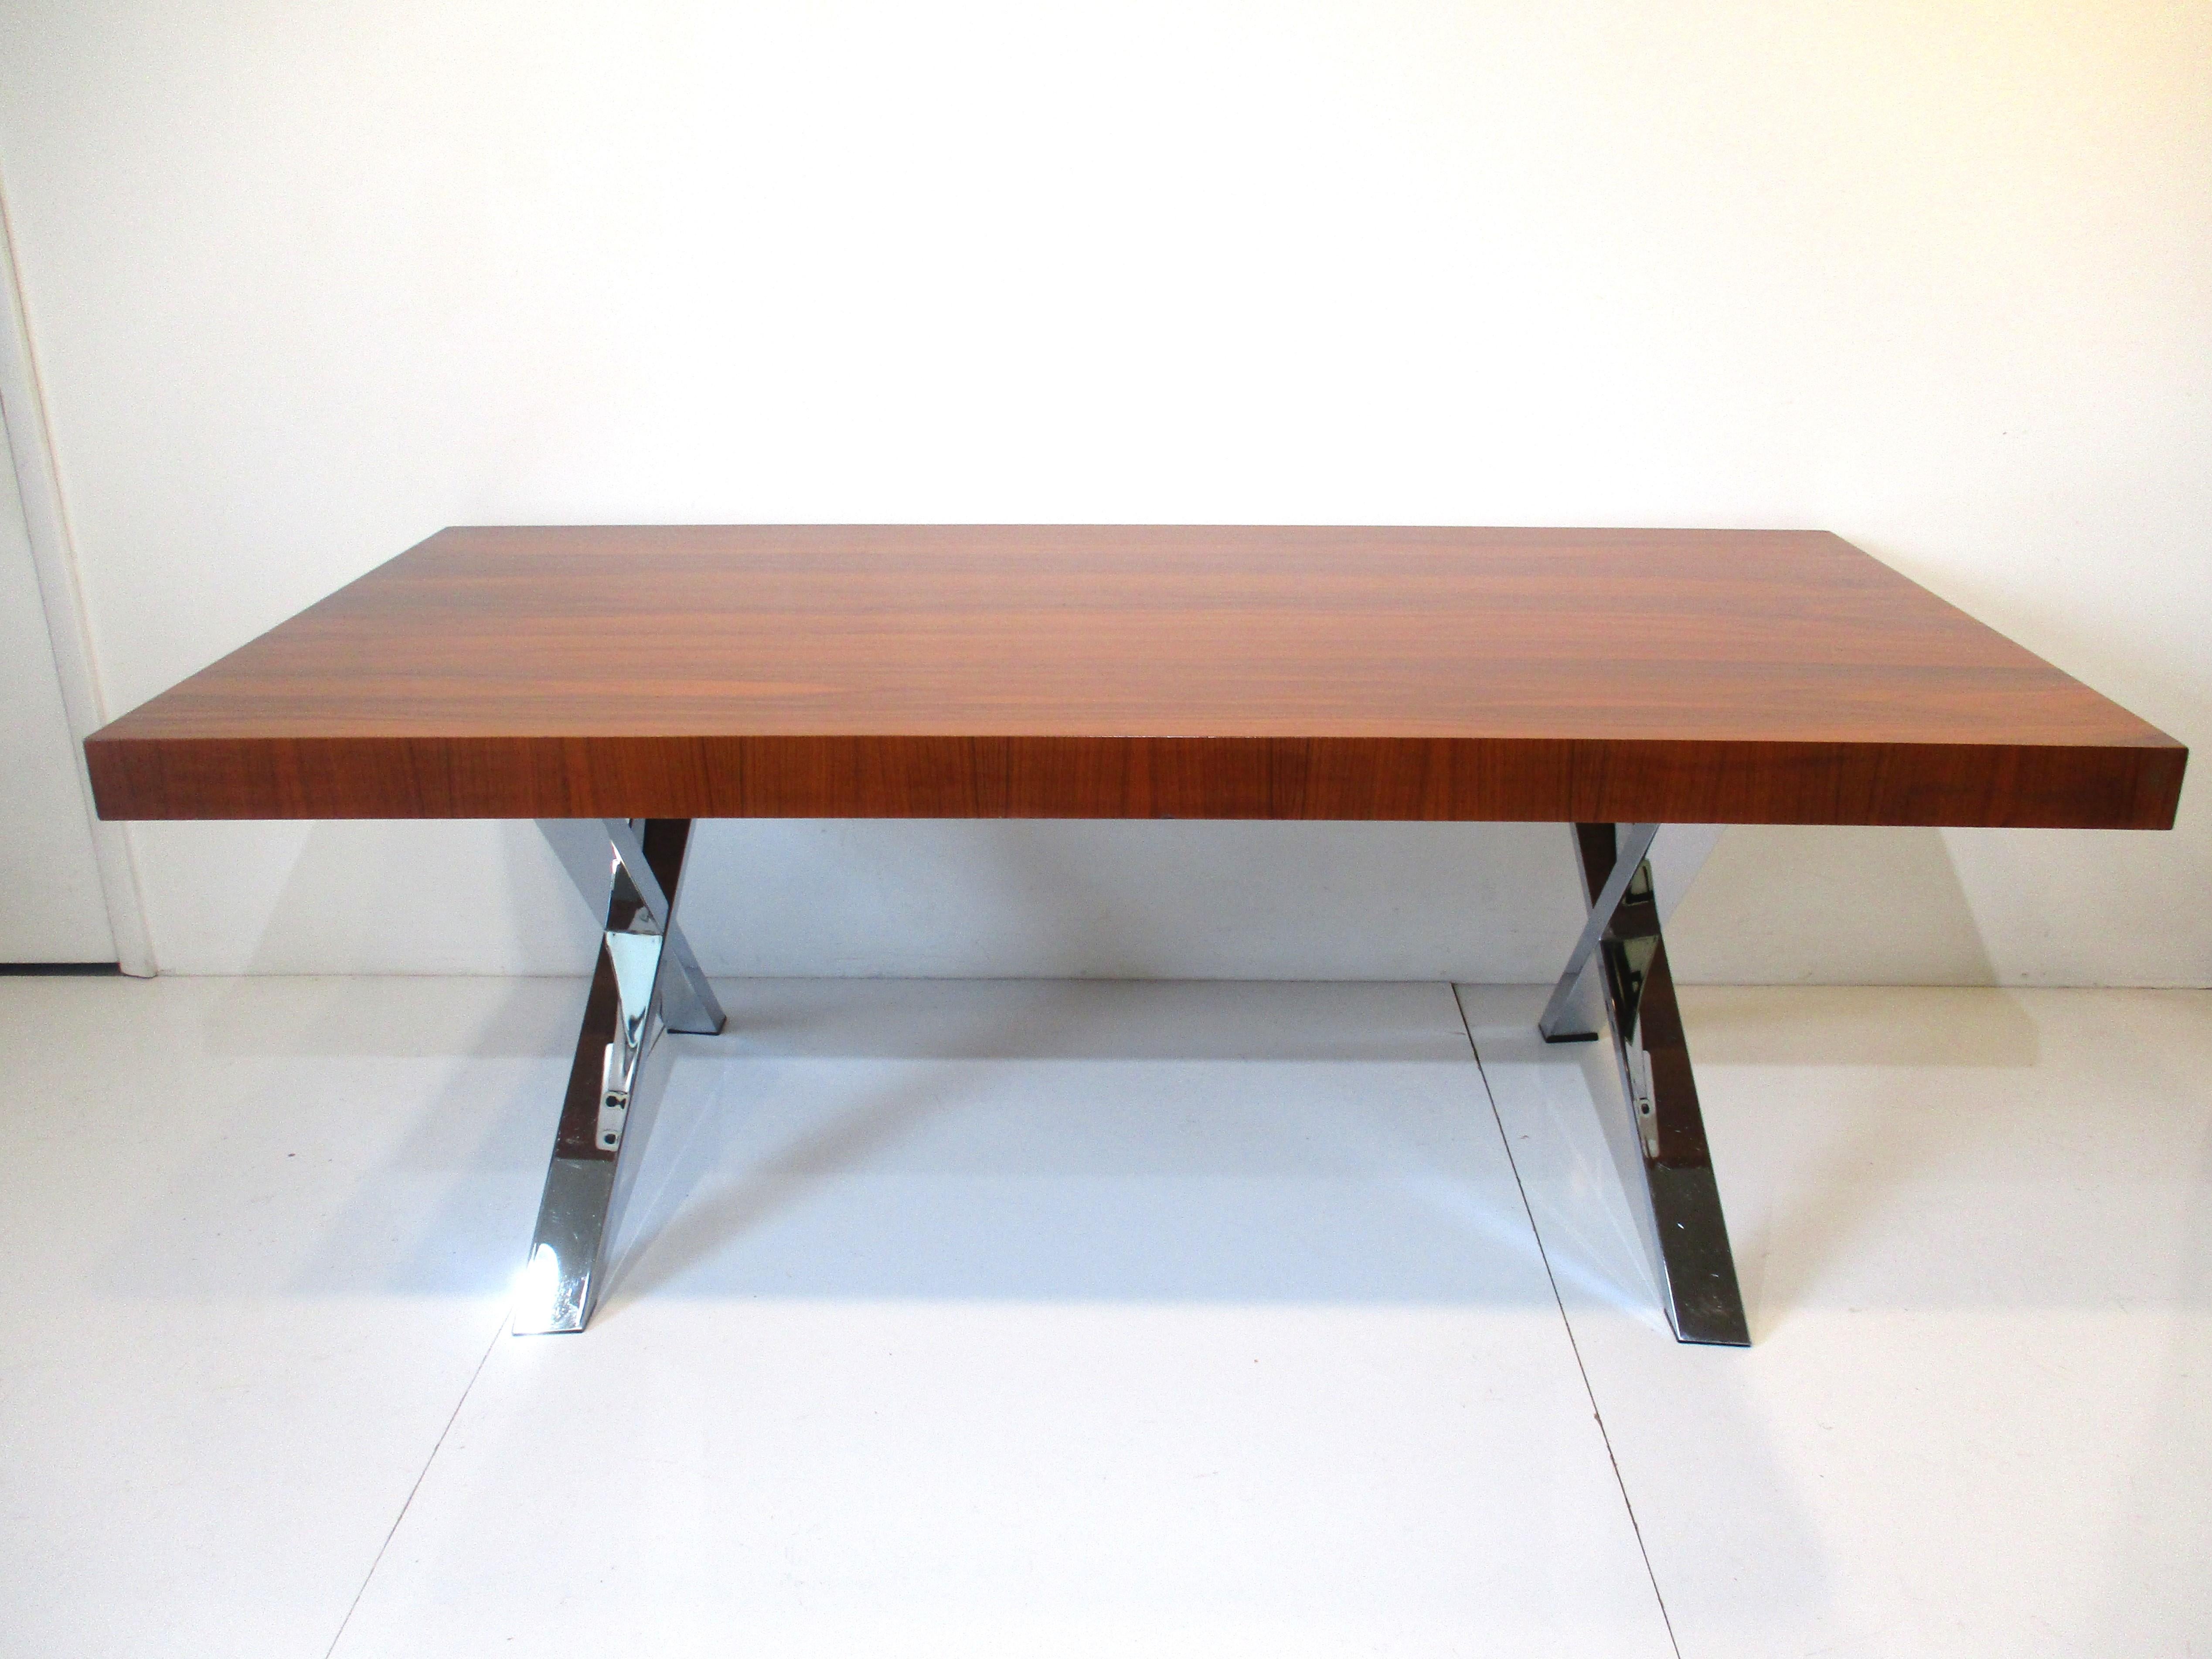 A well made walnut slab styled dining table with chromed metal X base design giving the piece a presence. Made in Italy this piece has a simple but elegant look that would work in many interiors.